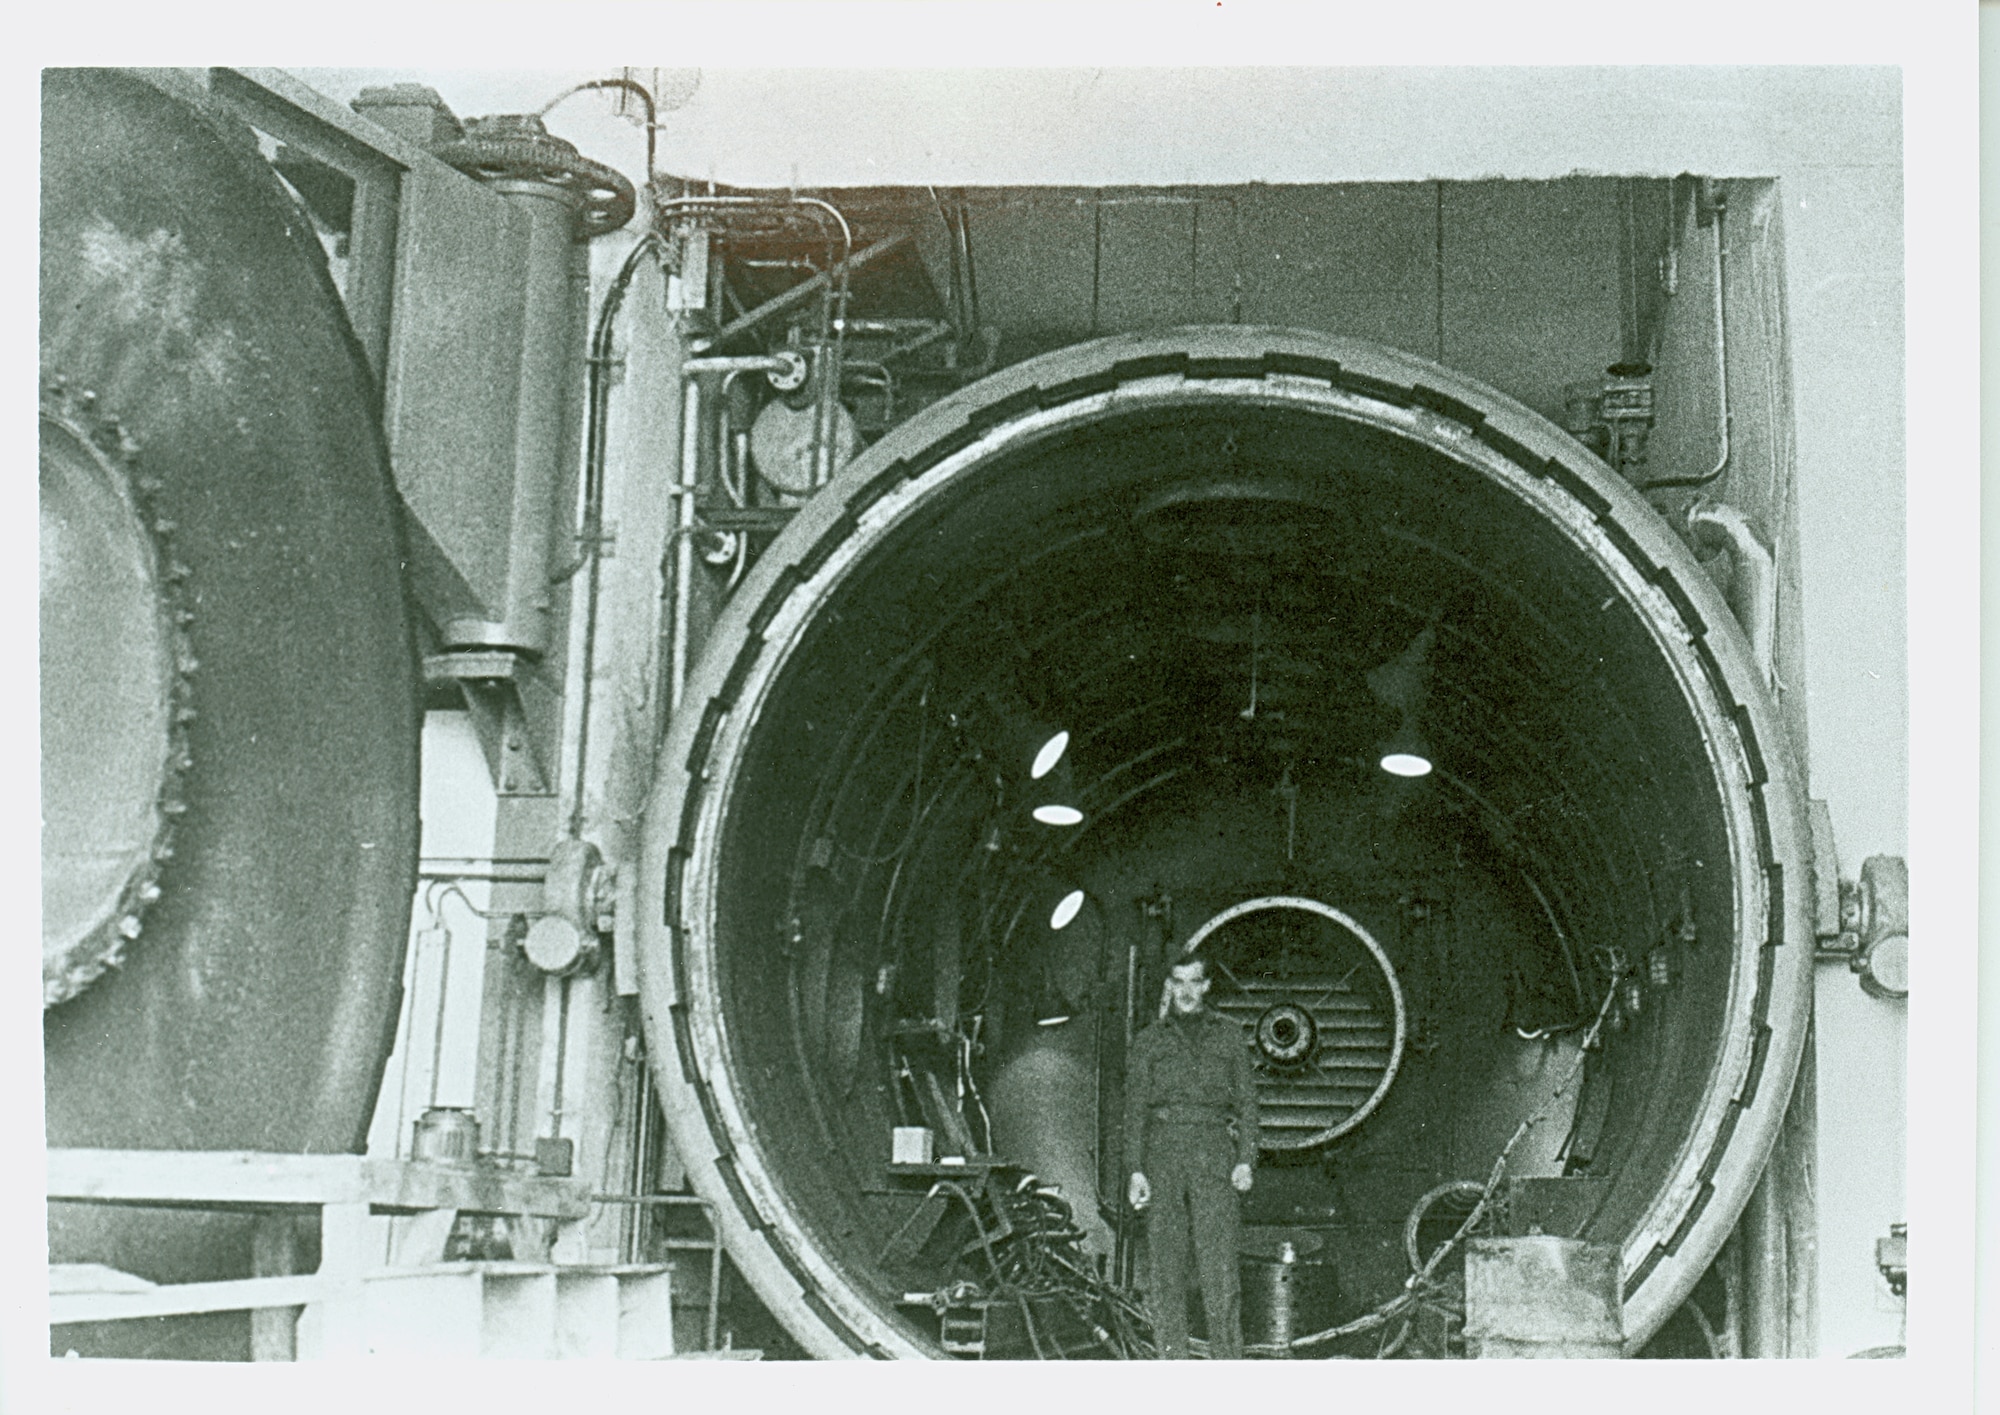 A 1945 photo shows one of the two high altitude cells at the Munich BMW plant. Engines having up to 4,400 pounds of thrust could be tested at conditions simulating Mach number 0.8 (about 525 mph) at 55,000 feet. Inlet air supply totaled 55 pounds per second. 